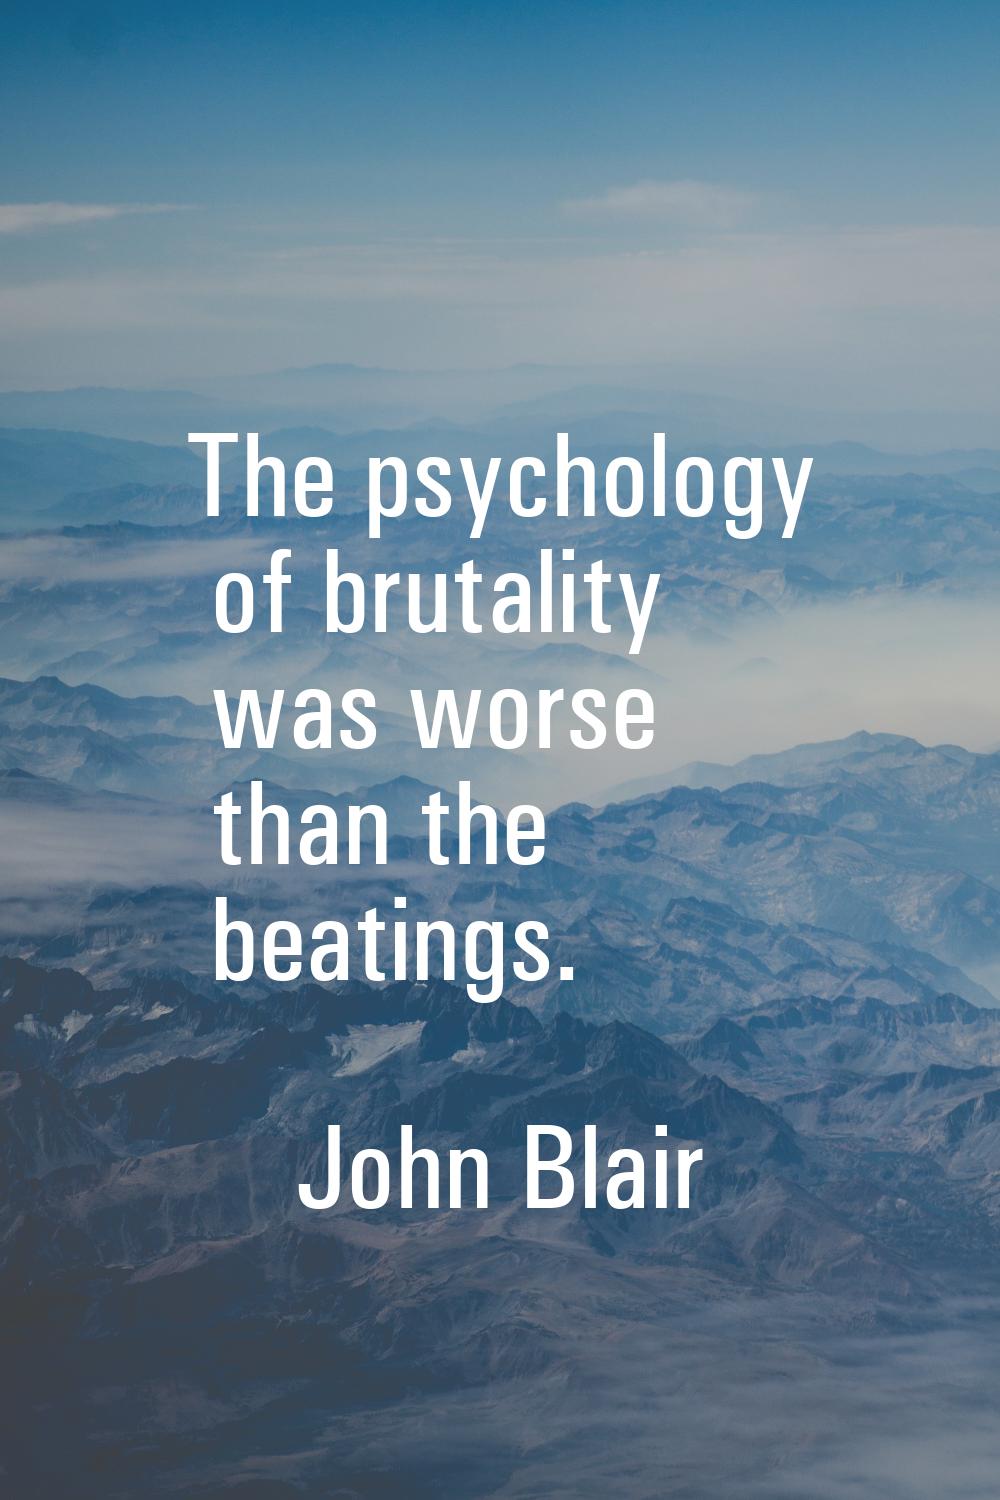 The psychology of brutality was worse than the beatings.